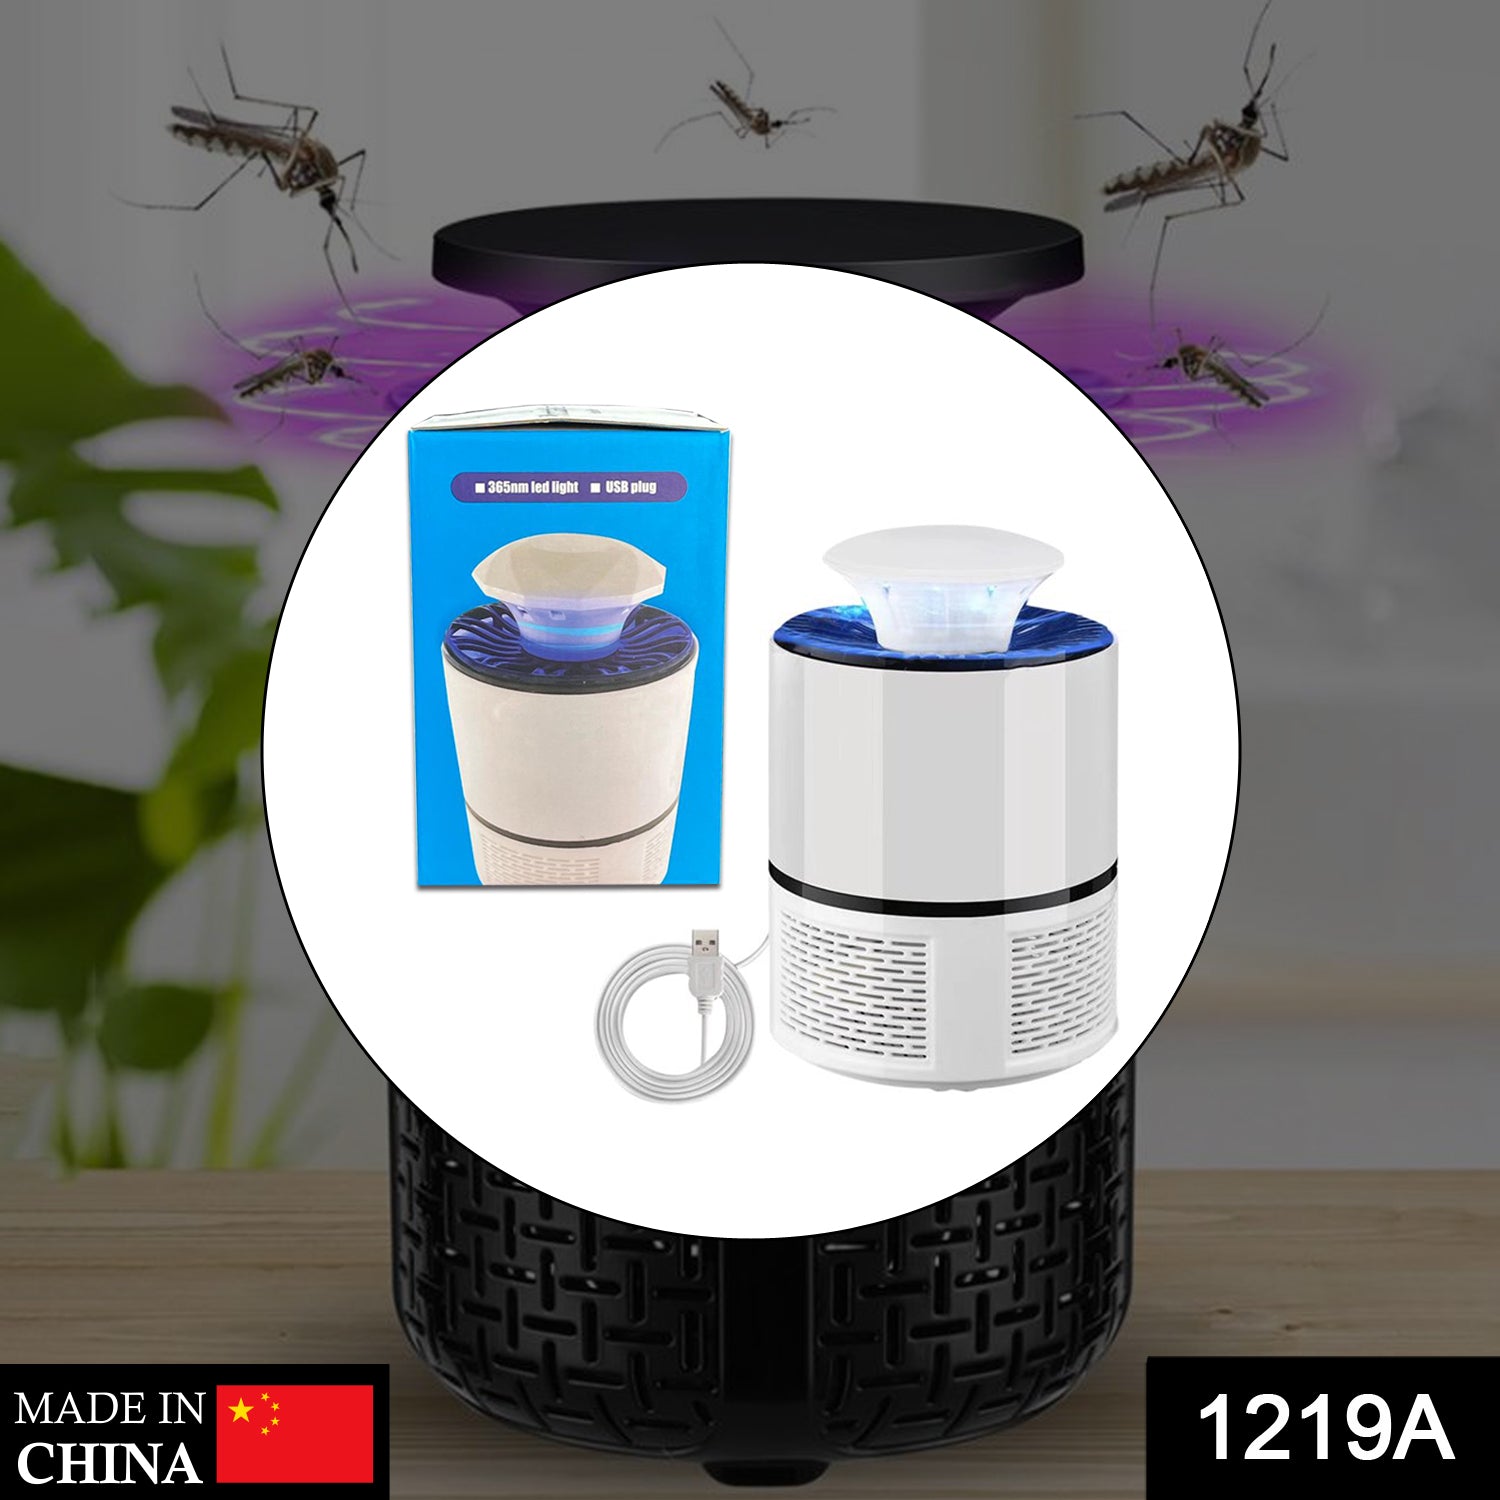 1219A Mosquito Killer Machine Mosquito Killer Trap Lamp Mosquito Killer lamp for Home Electronic Fly Inhaler Mosquito Killer Lamp DeoDap